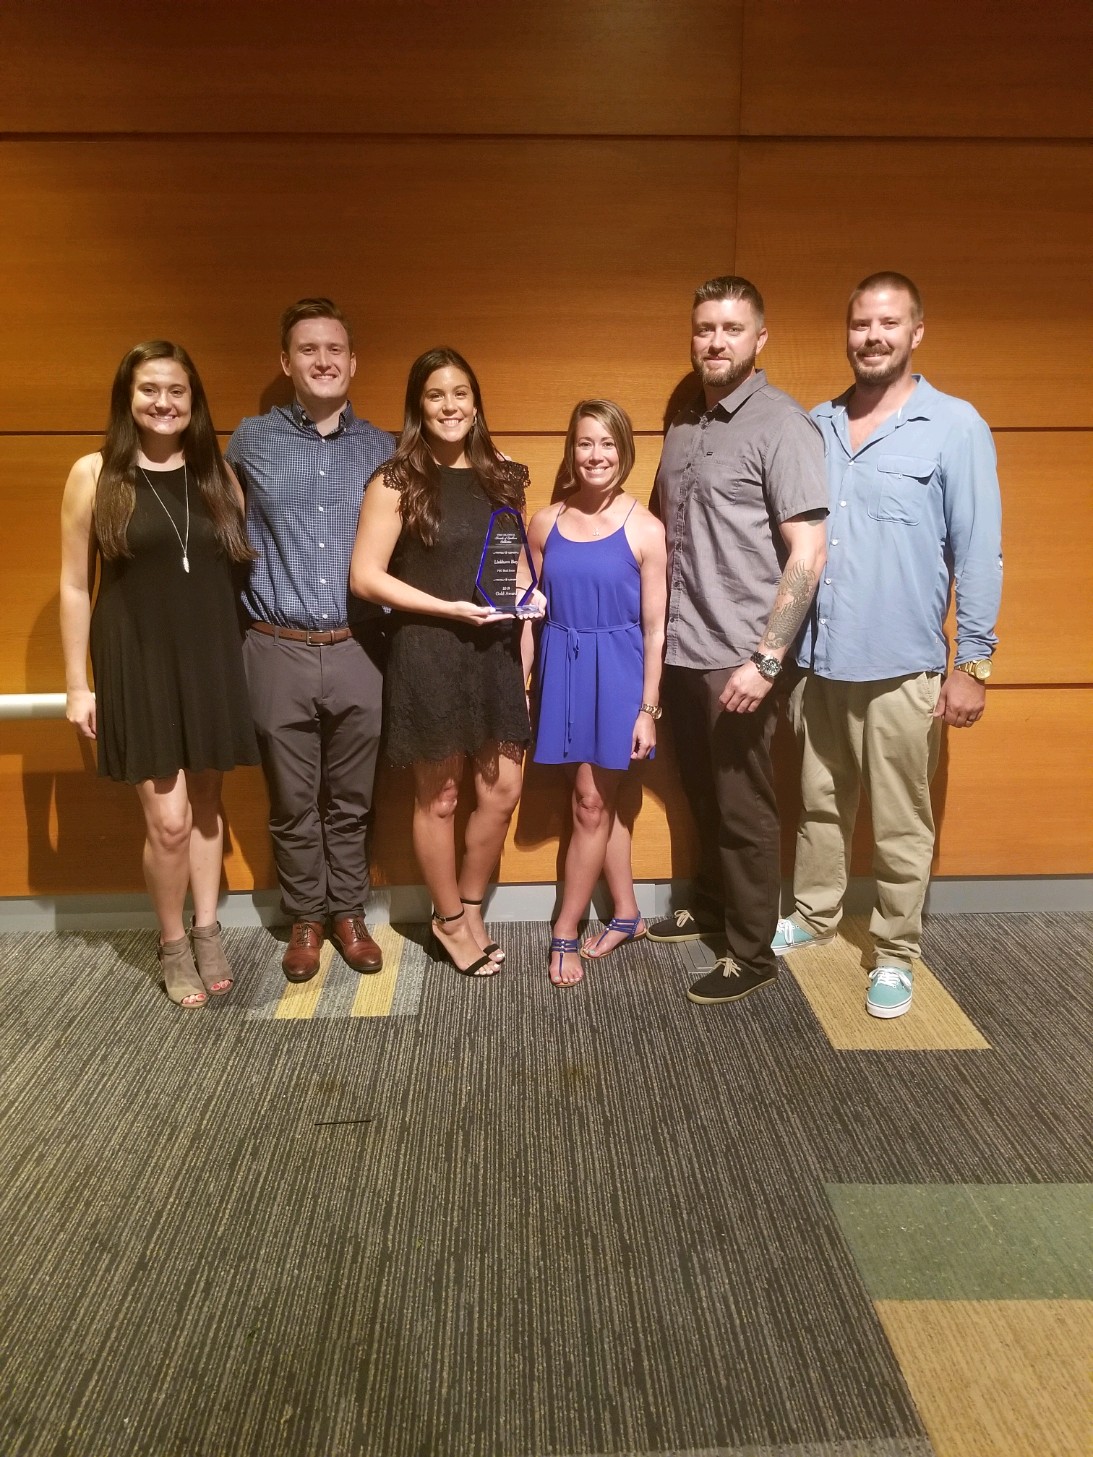 Recipients of TMHC's 2019 Community Of The Year Award